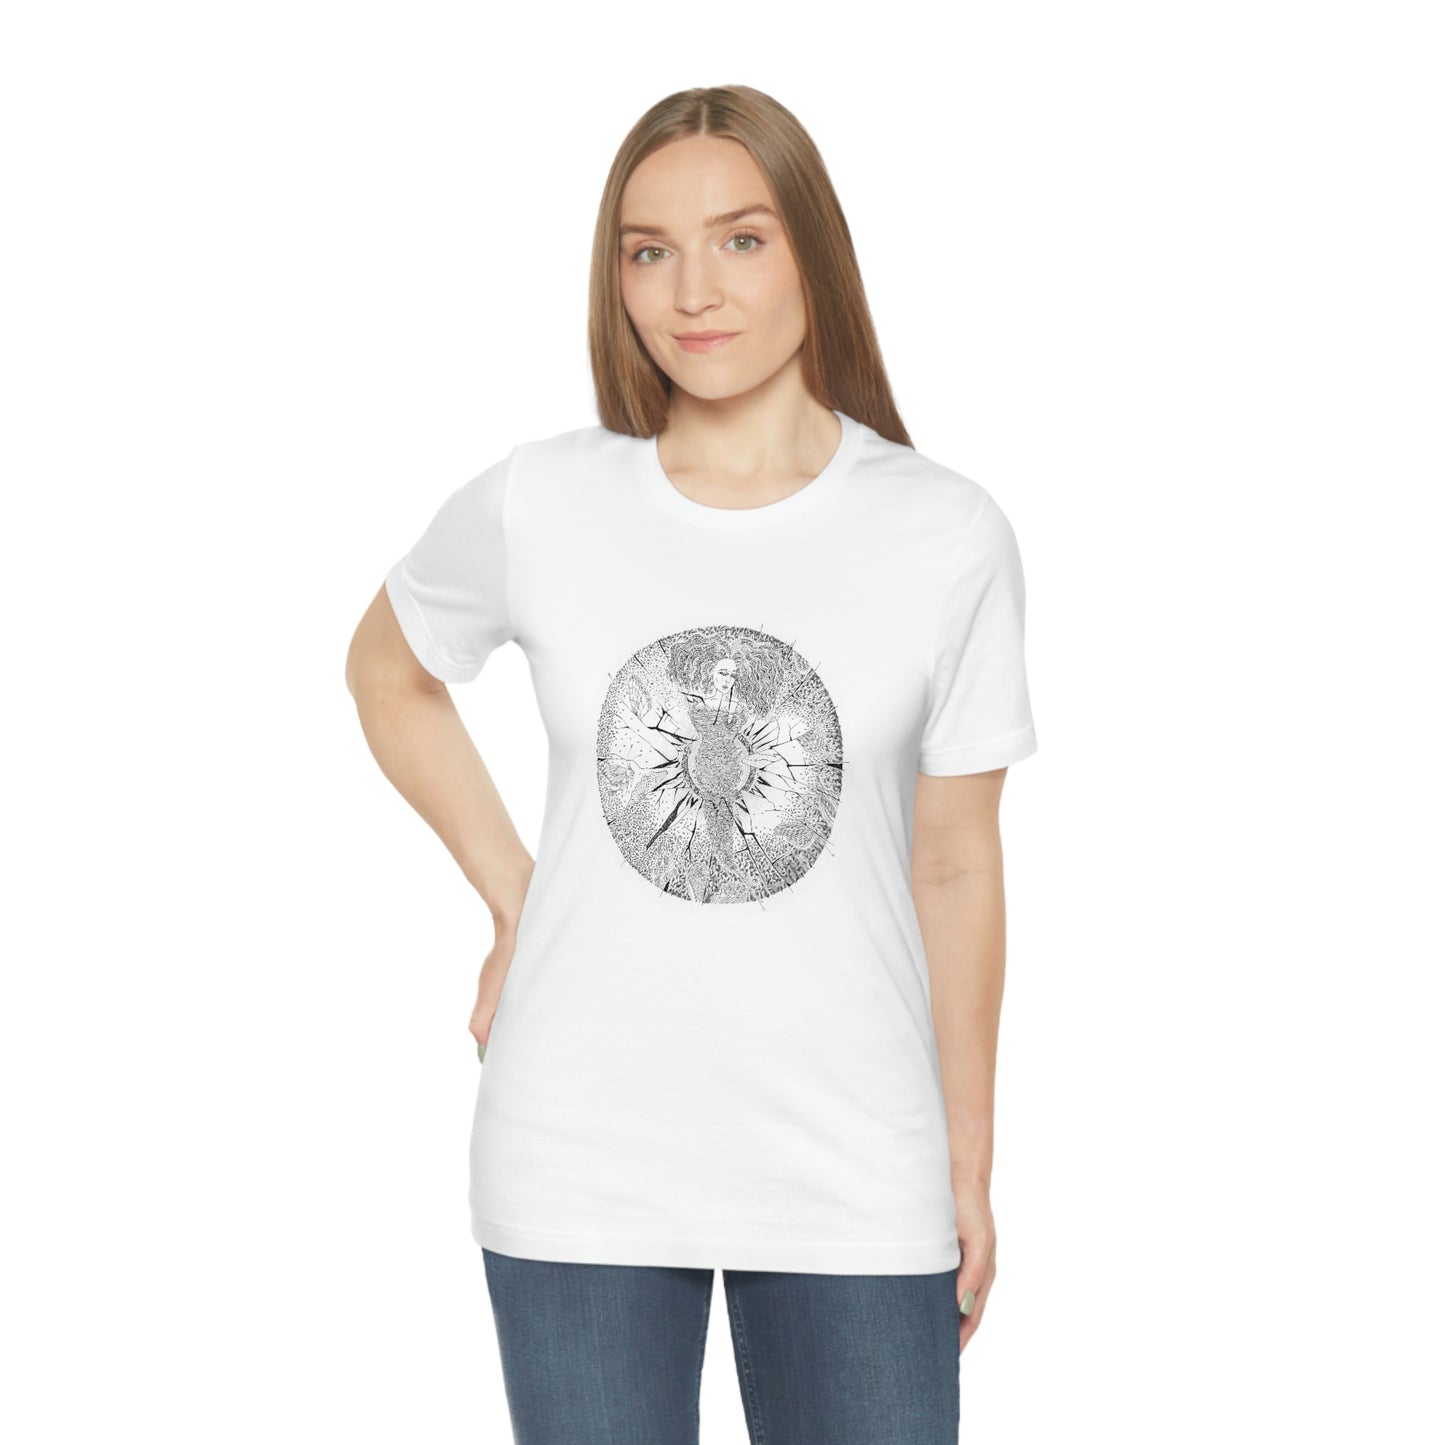 Chinese Zodiac Sign T Shirt (Snake) Unisex Regular Fit Limited Edition